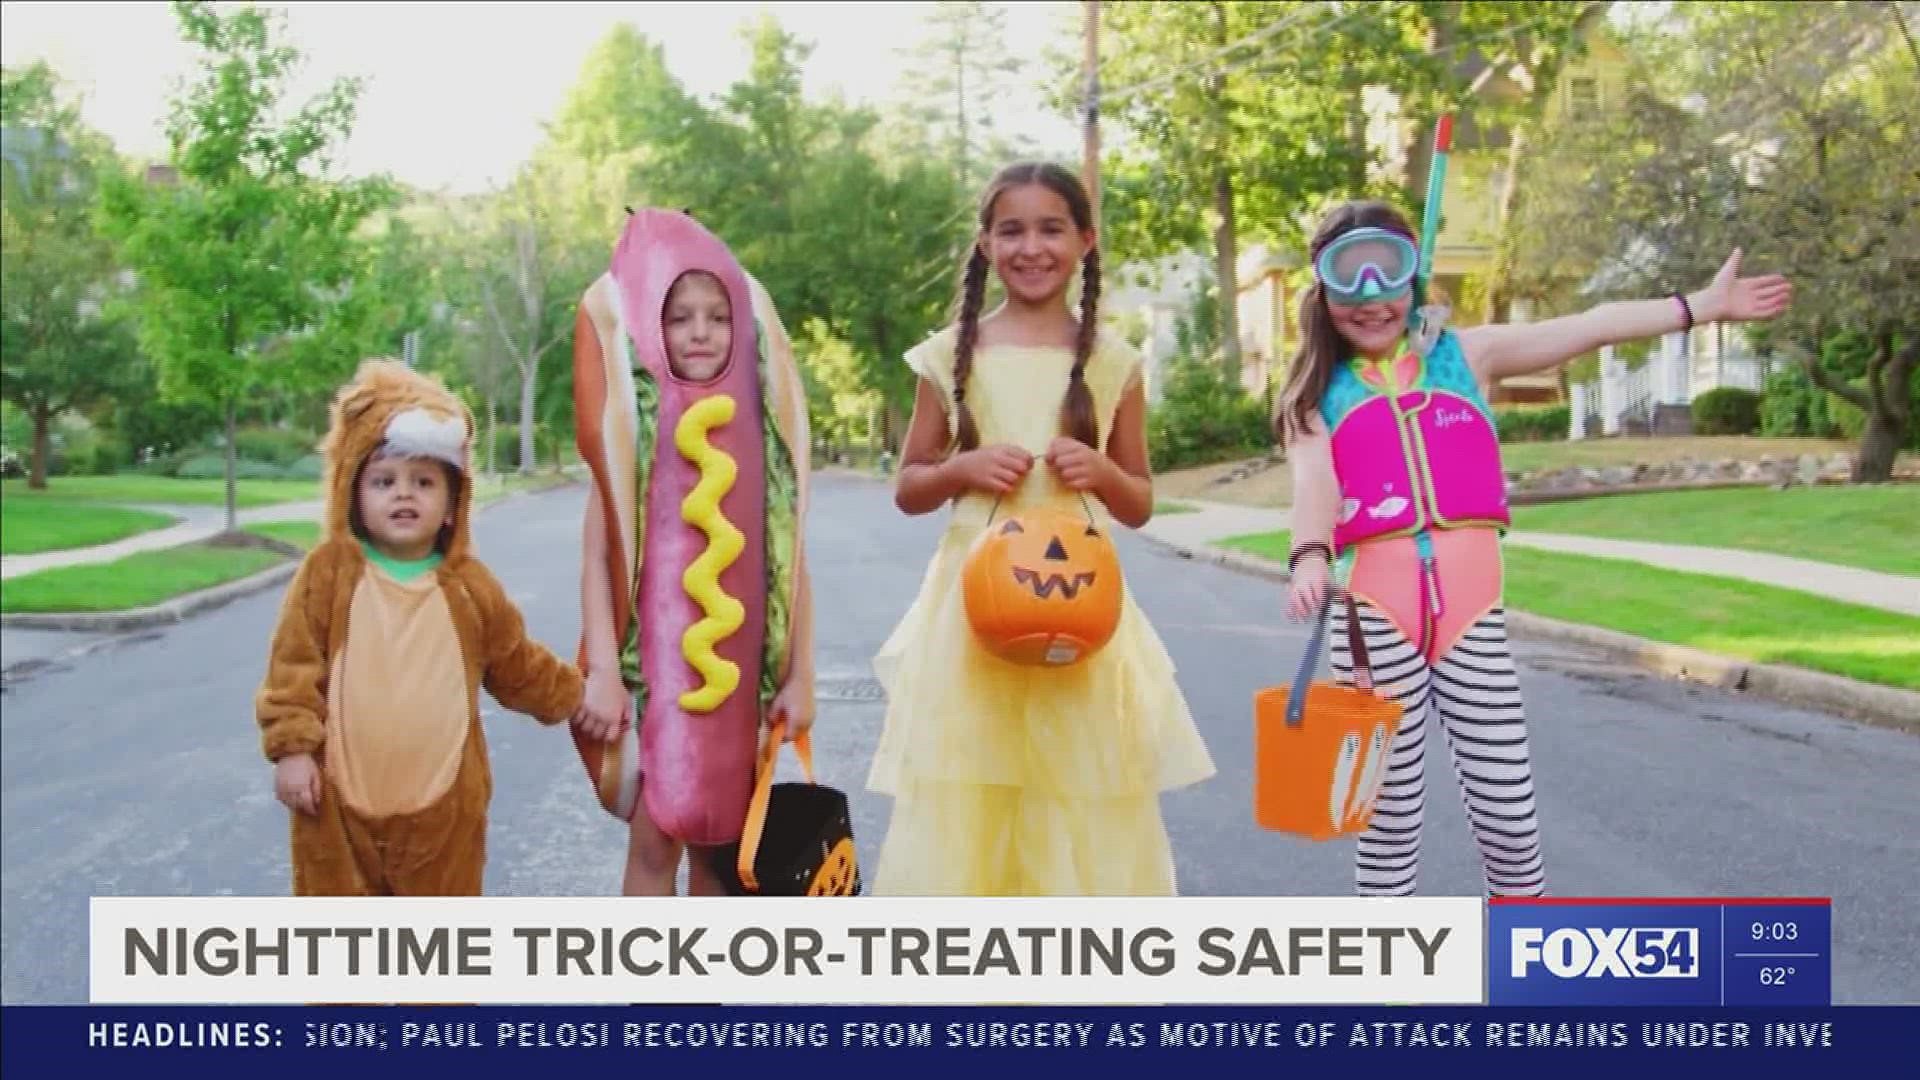 Safety tips from candy to costumes to keep your kids safe this spooky season.